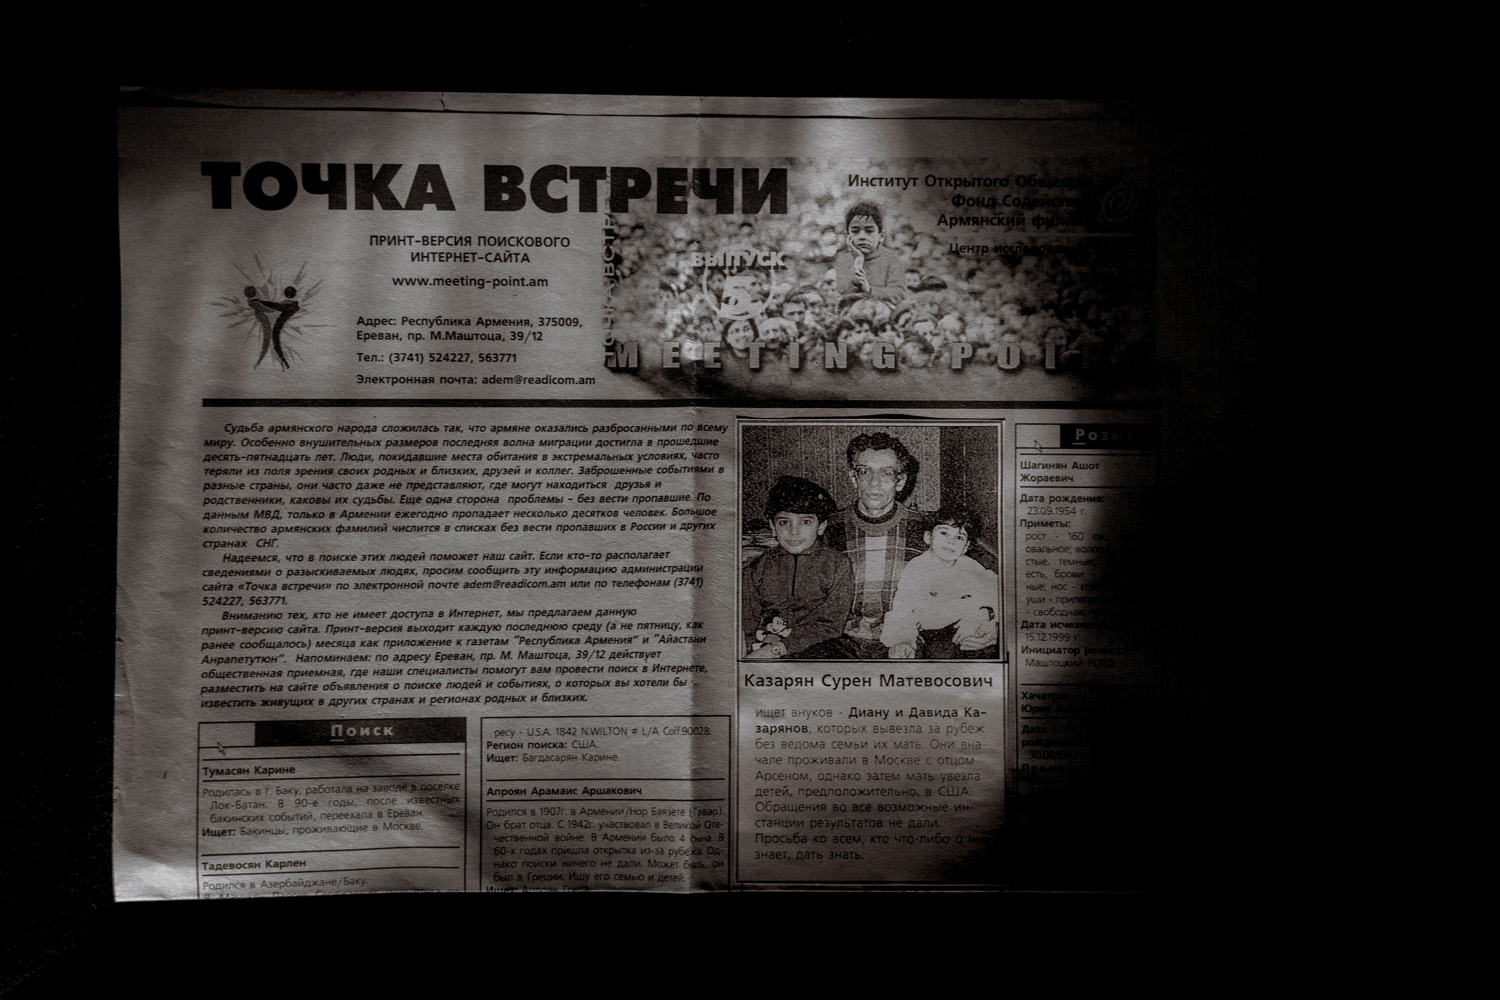 My father and grandfather searched for us after we vanished. This is a newspaper clipping titled 'Meeting Point' in Russian had an image of my father with my brother and me.